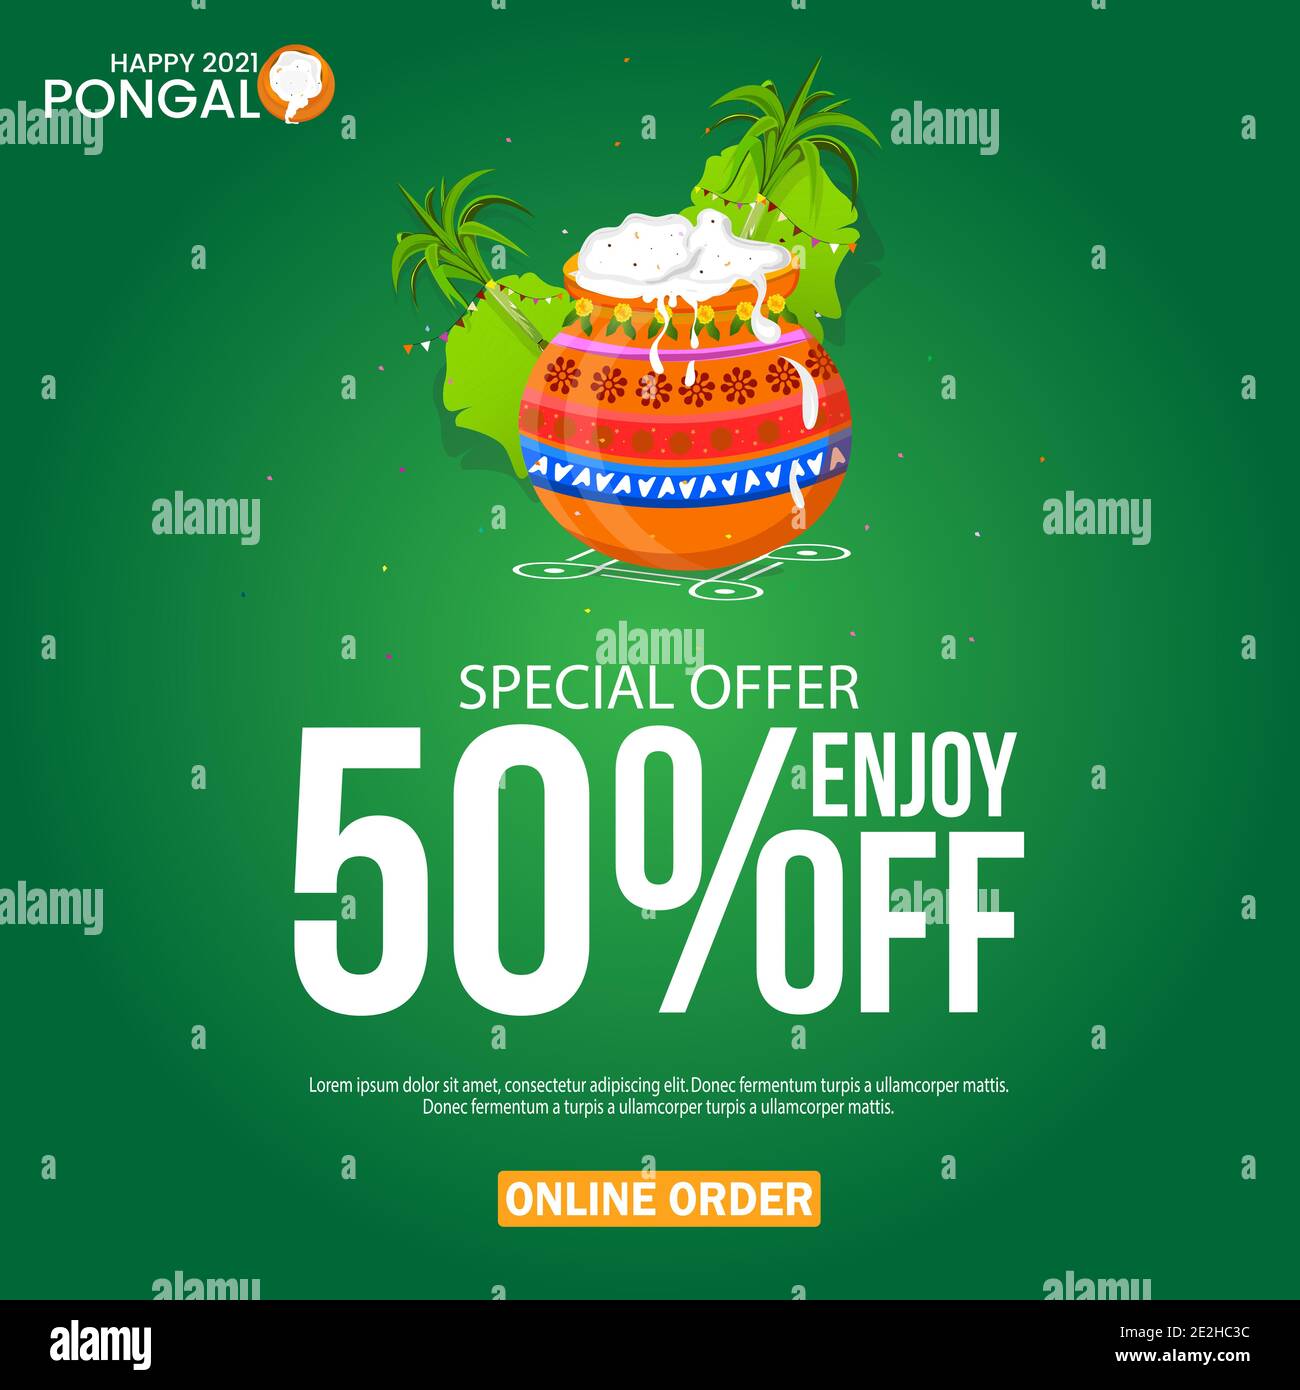 Pongal Festival Best Deal Offer Banner Design with 50% Discount Offer, Stock Vector